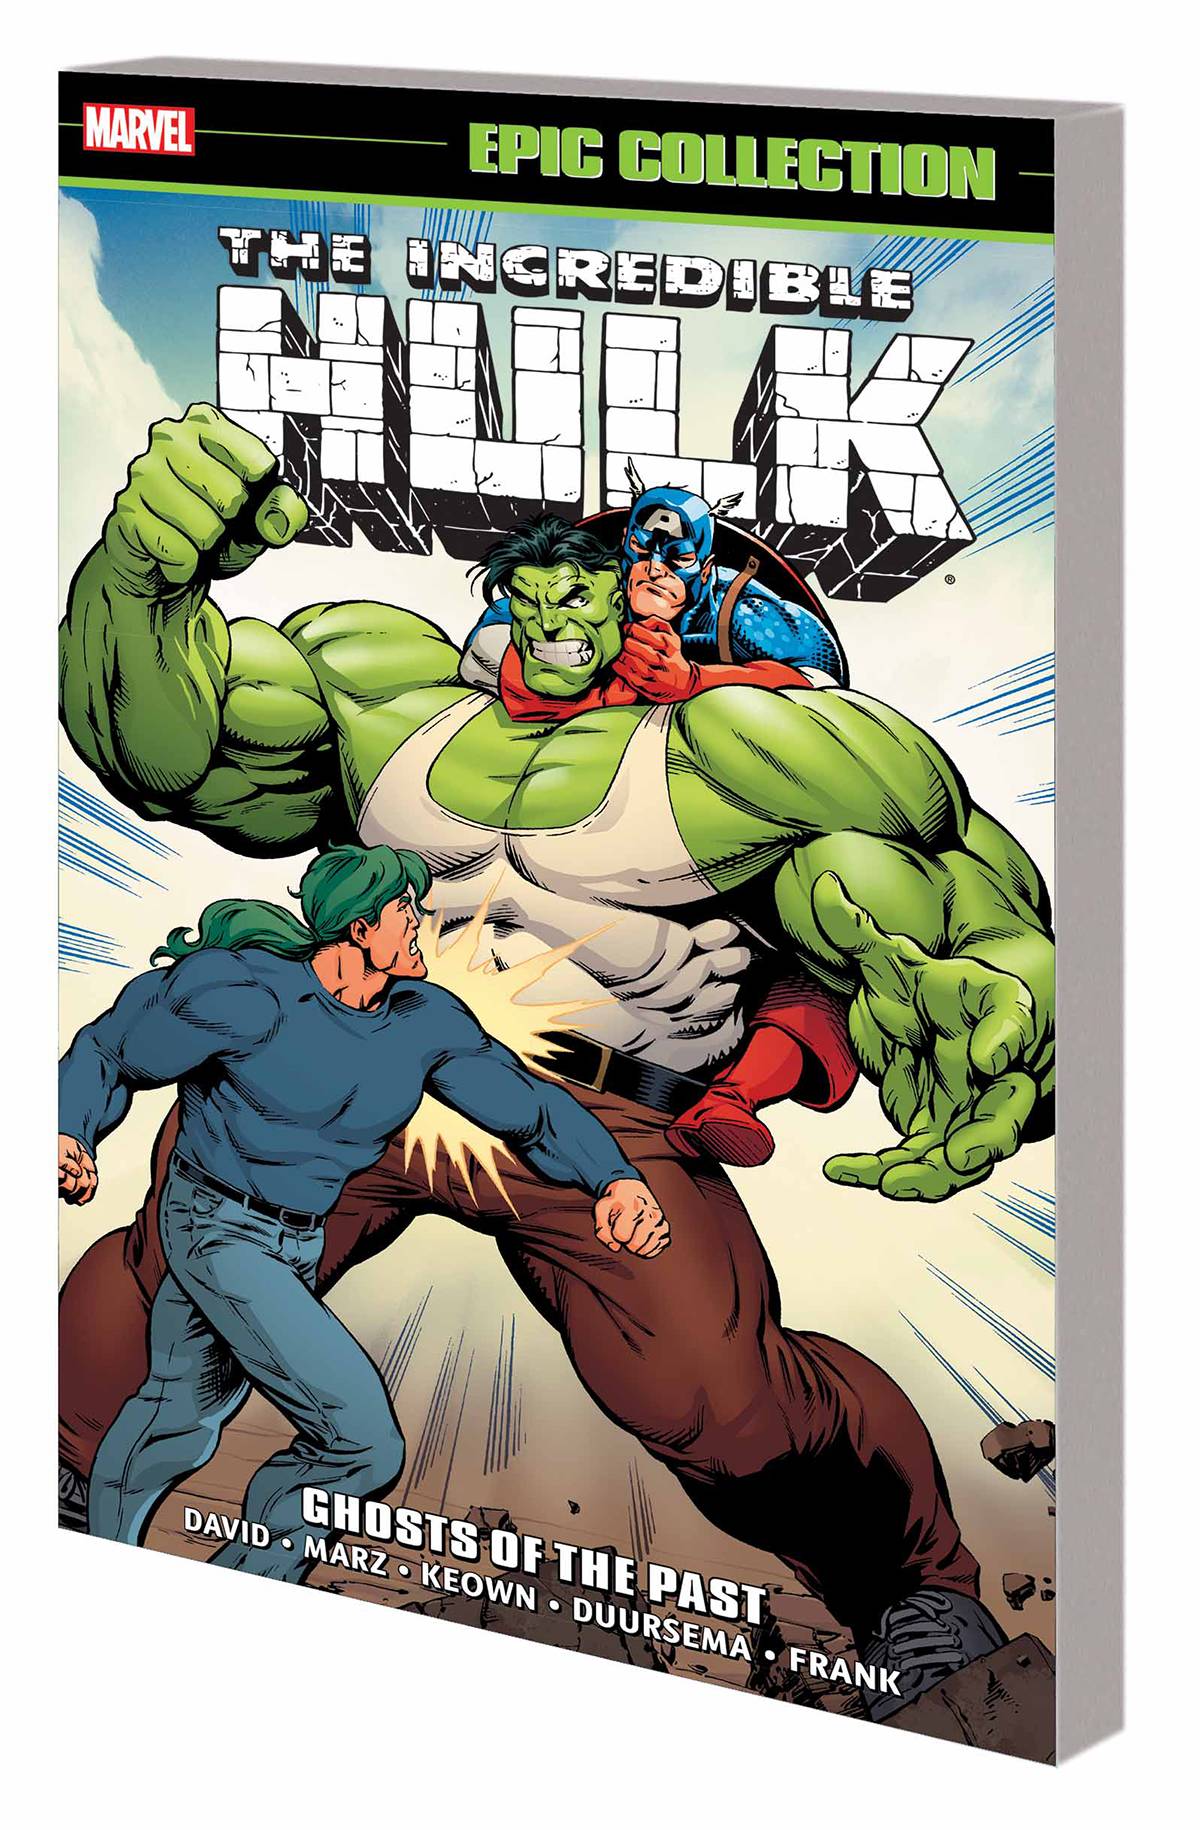 Incredible Hulk Epic Collection Graphic Novel Volume 19 Ghosts of the Past